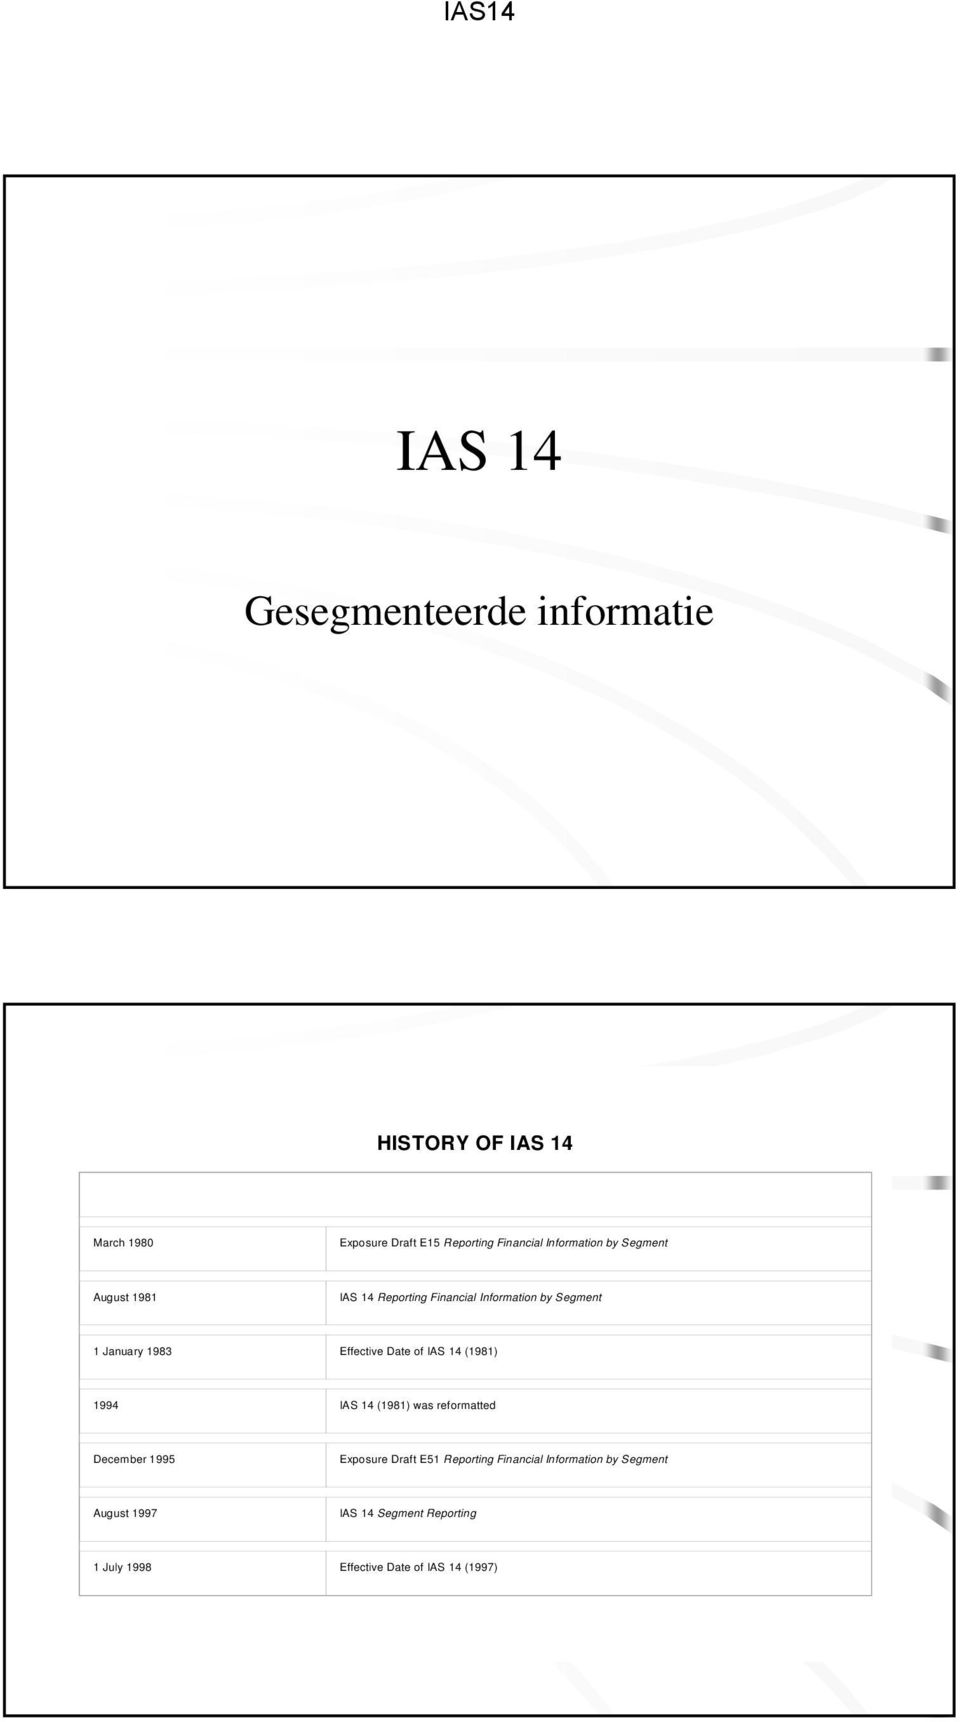 Effective Date of IAS 14 (1981) 1994 IAS 14 (1981) was reformatted December 1995 Exposure Draft E51